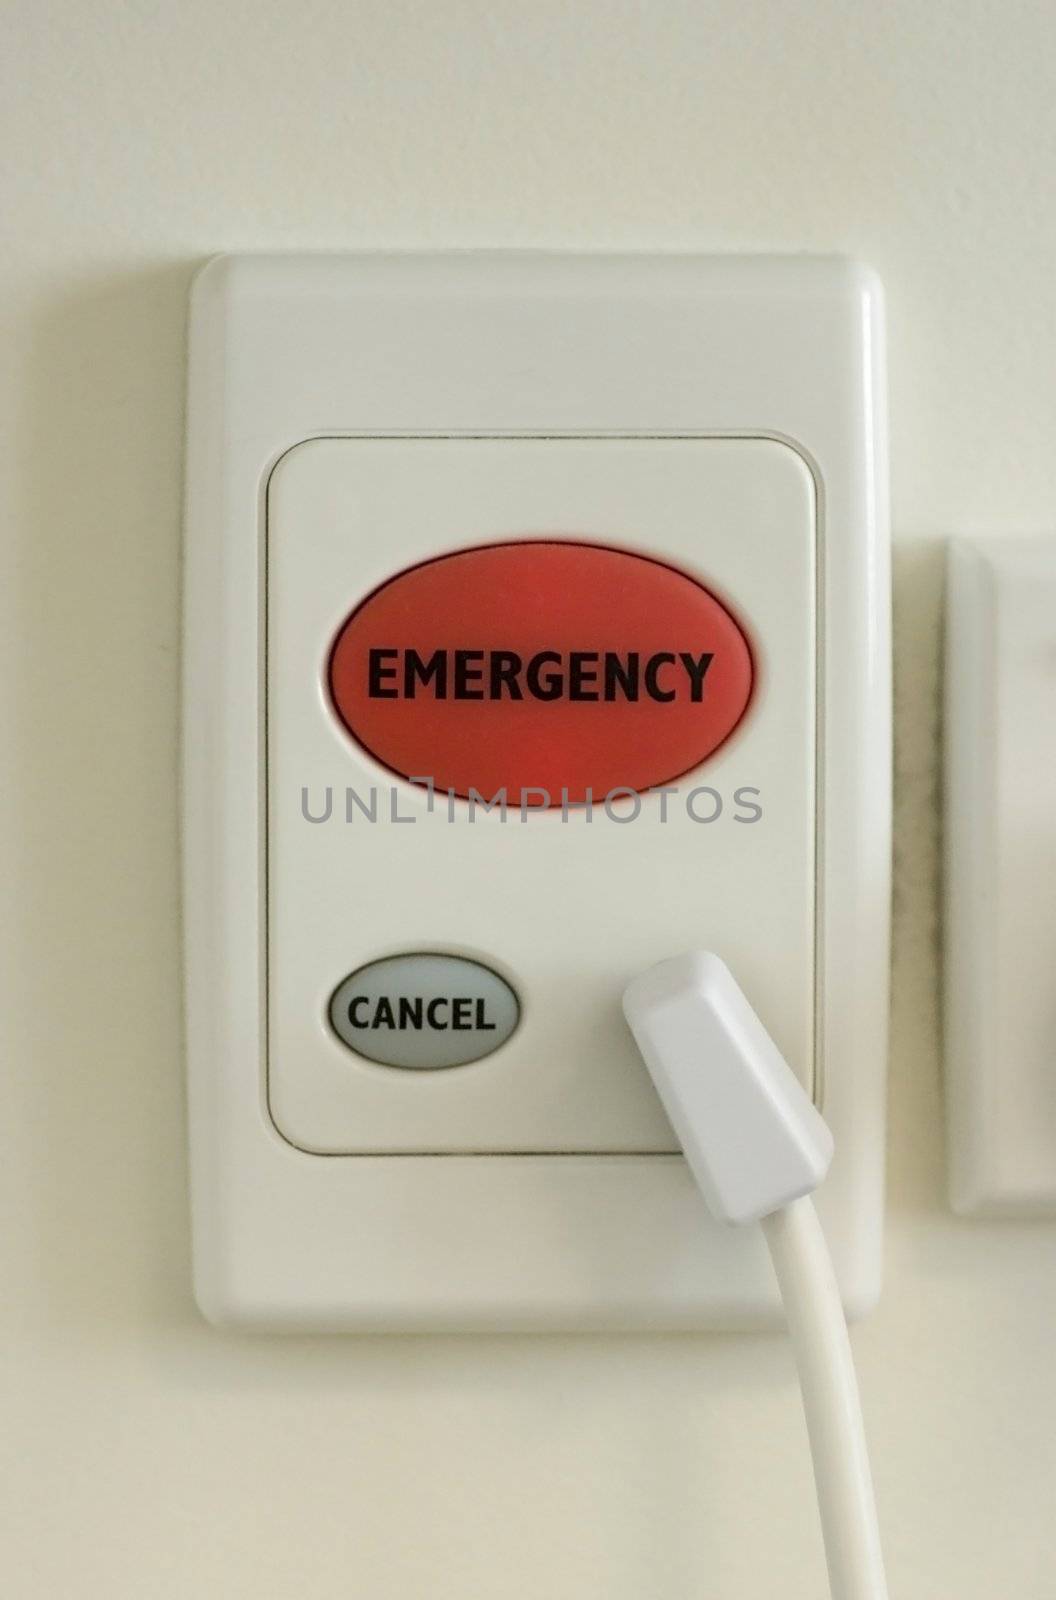 Emergency button found at hospital bedsides